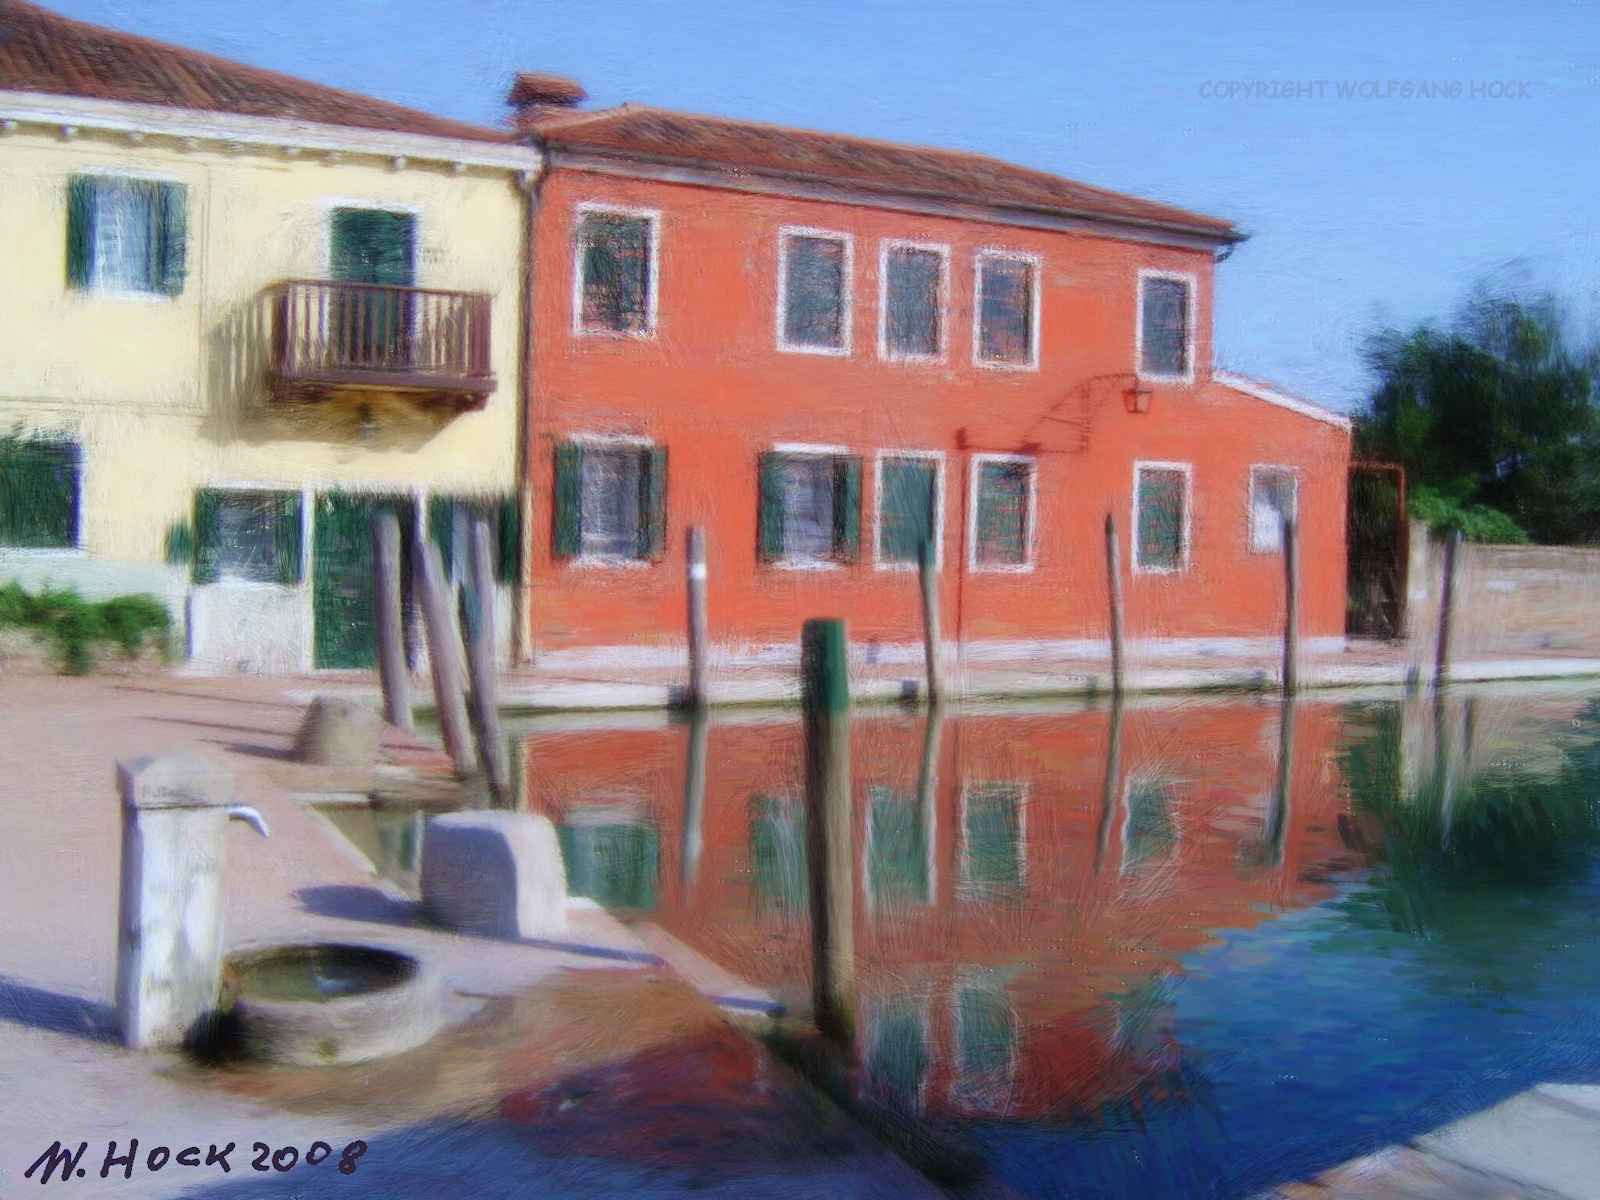 The red house 2008   Inkjet printed computer painting on paper, edition of 5 40 x 30 cm (3,1 megapixel)